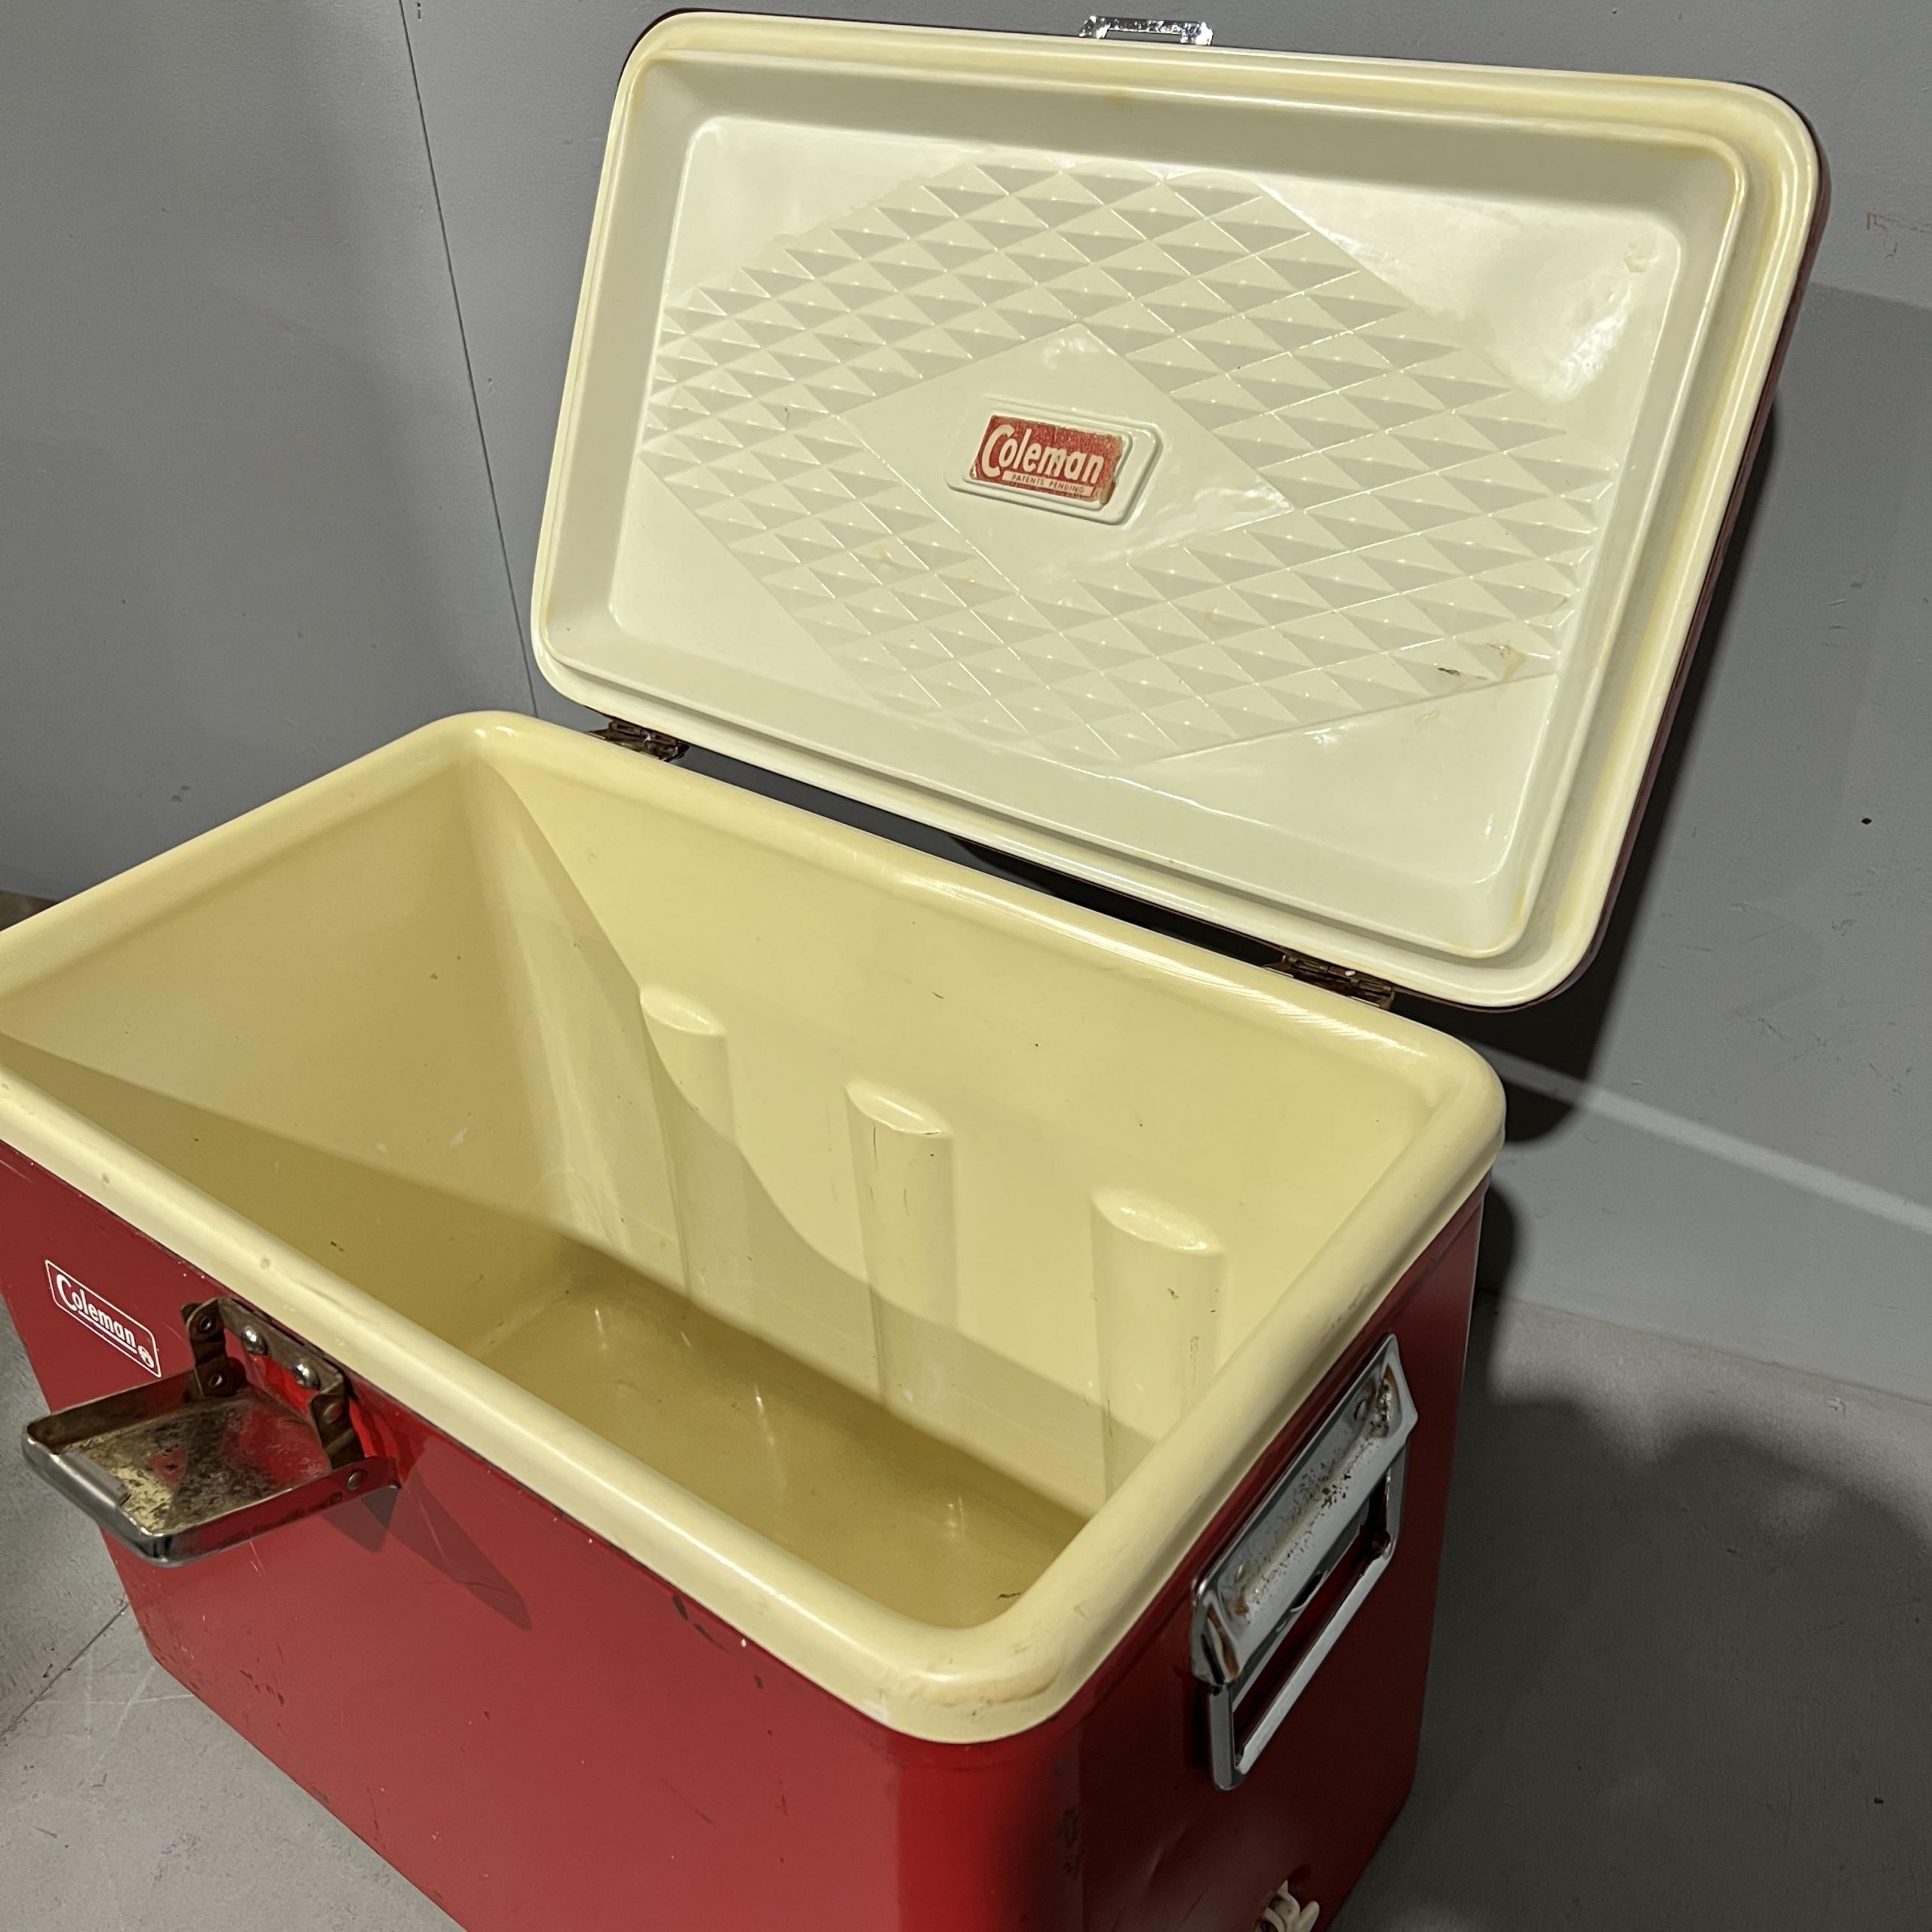 Coleman Portable Coolers at Lowes.com